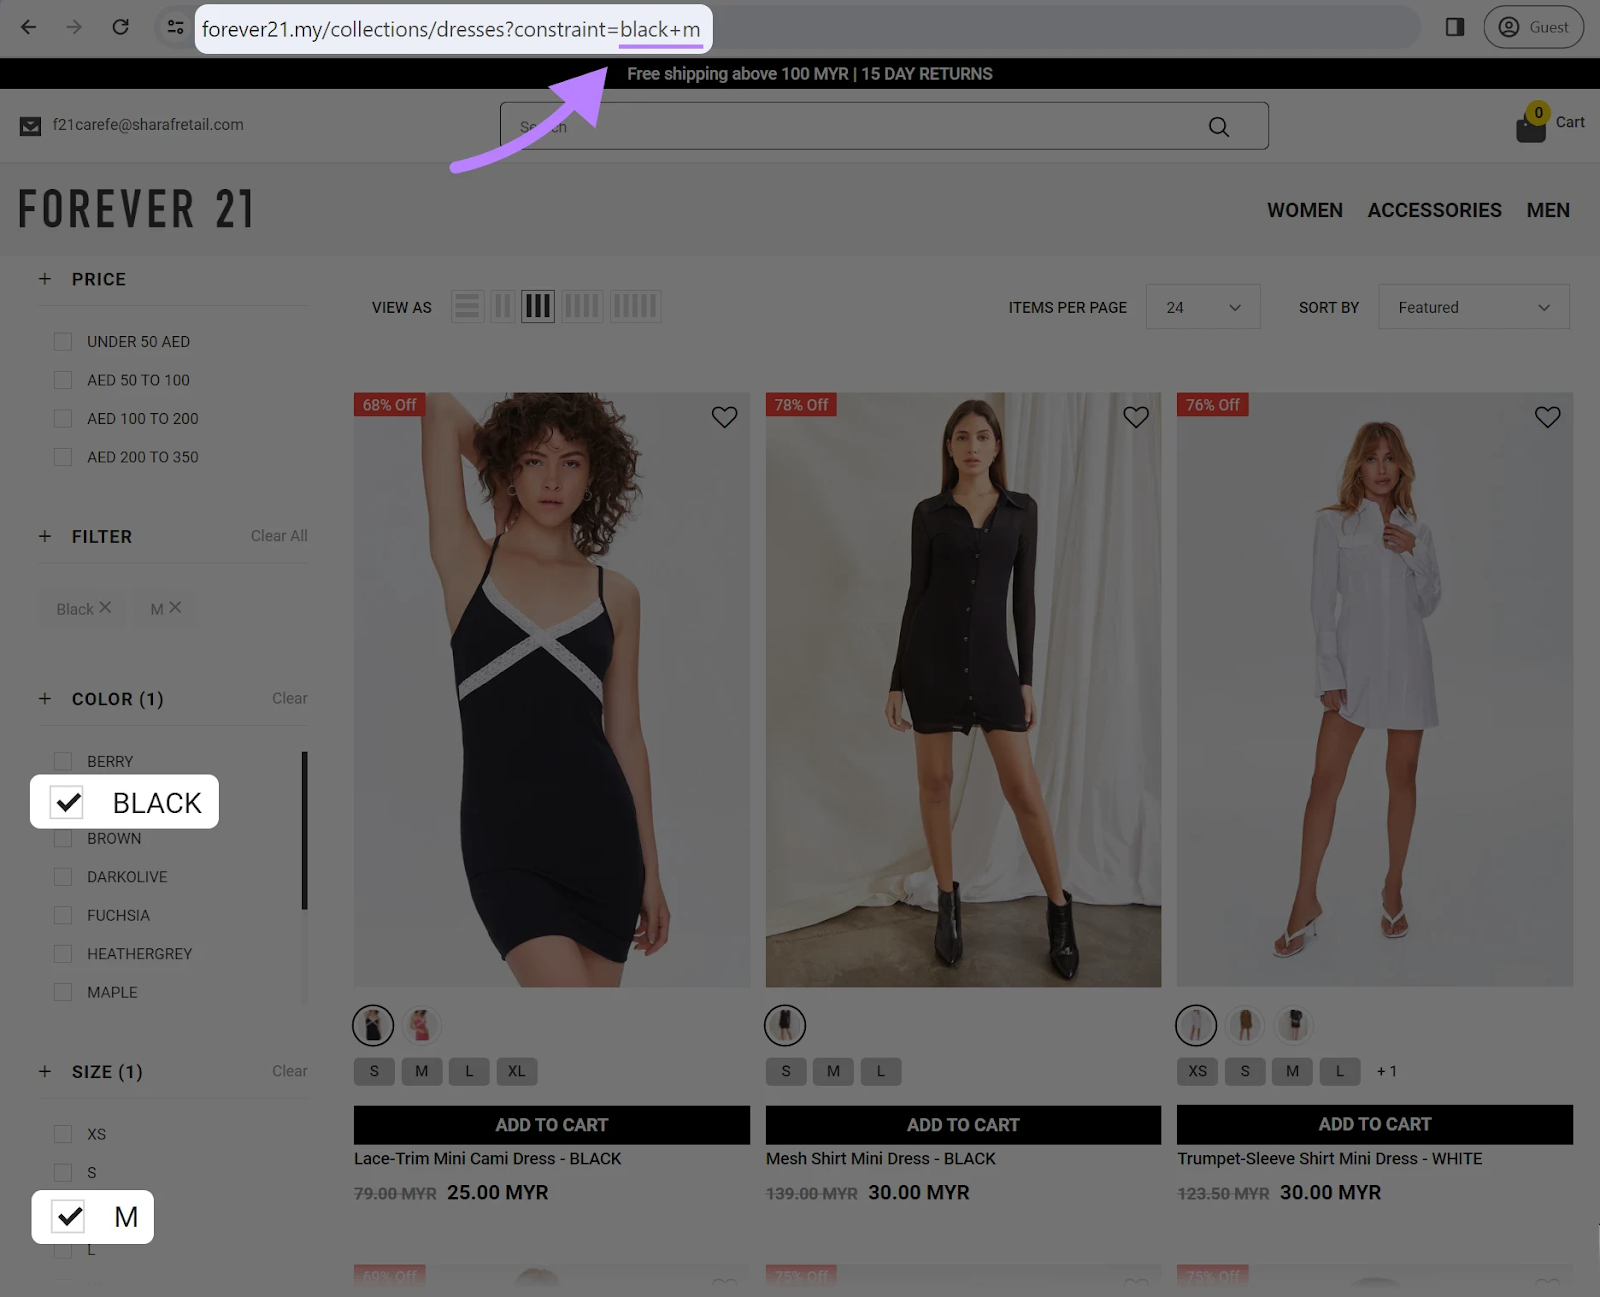 "Black," and "M" filters selected on a page with the url that reads: "forever21.my/collections/dresses?constraint=black+m"